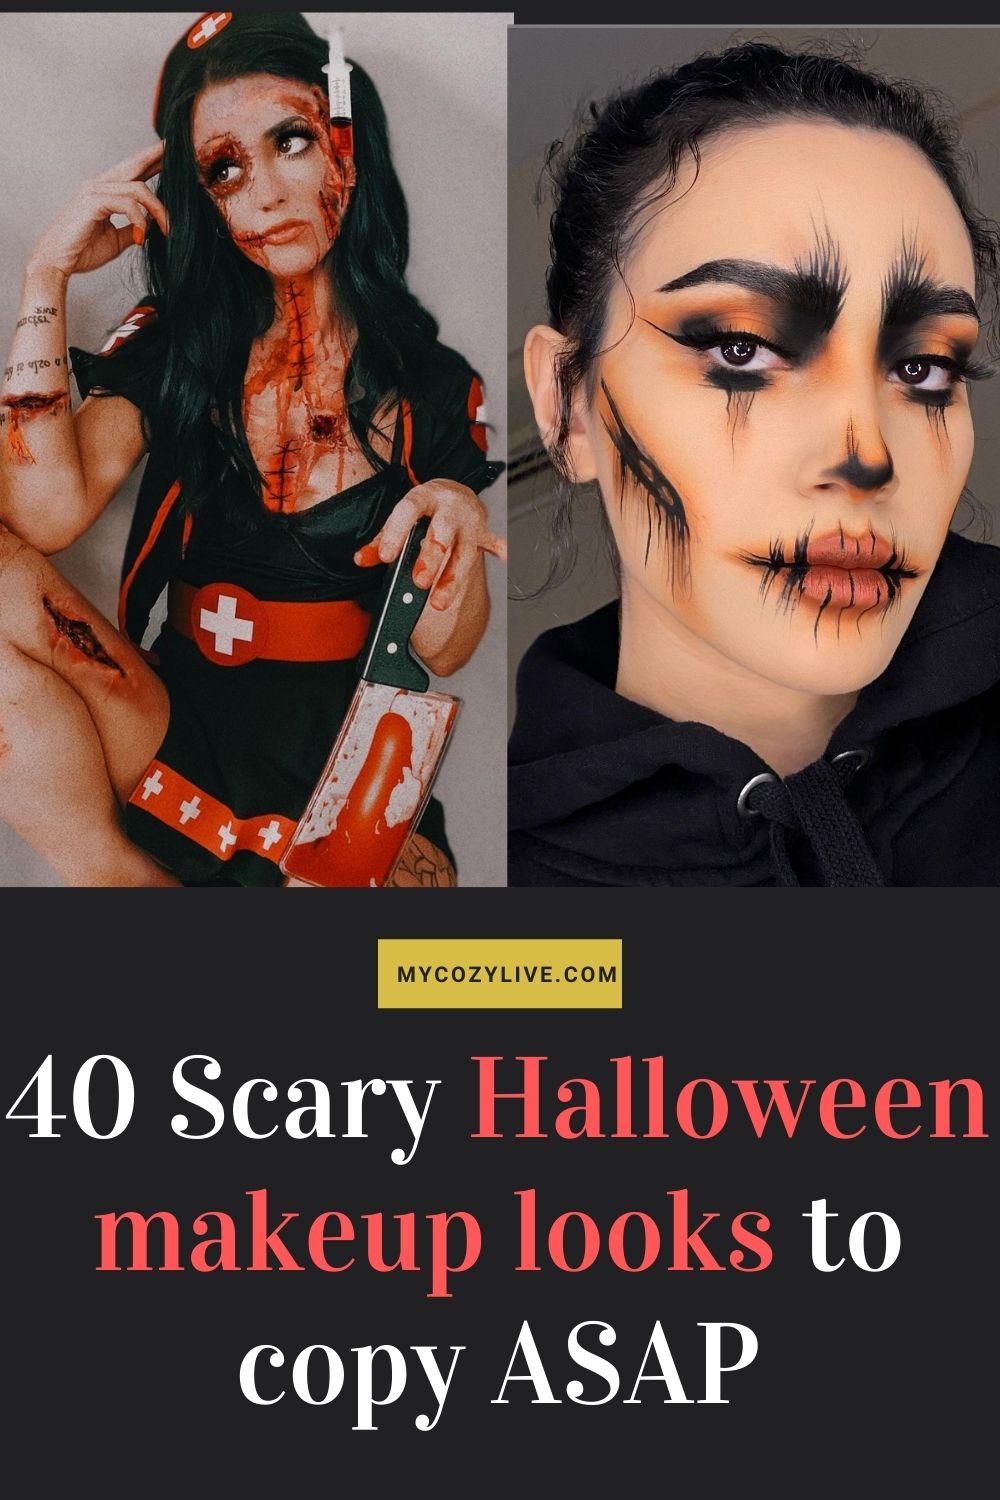 40 Creative Bloody Halloween makeup looks For Halloween party - Page 2 ...